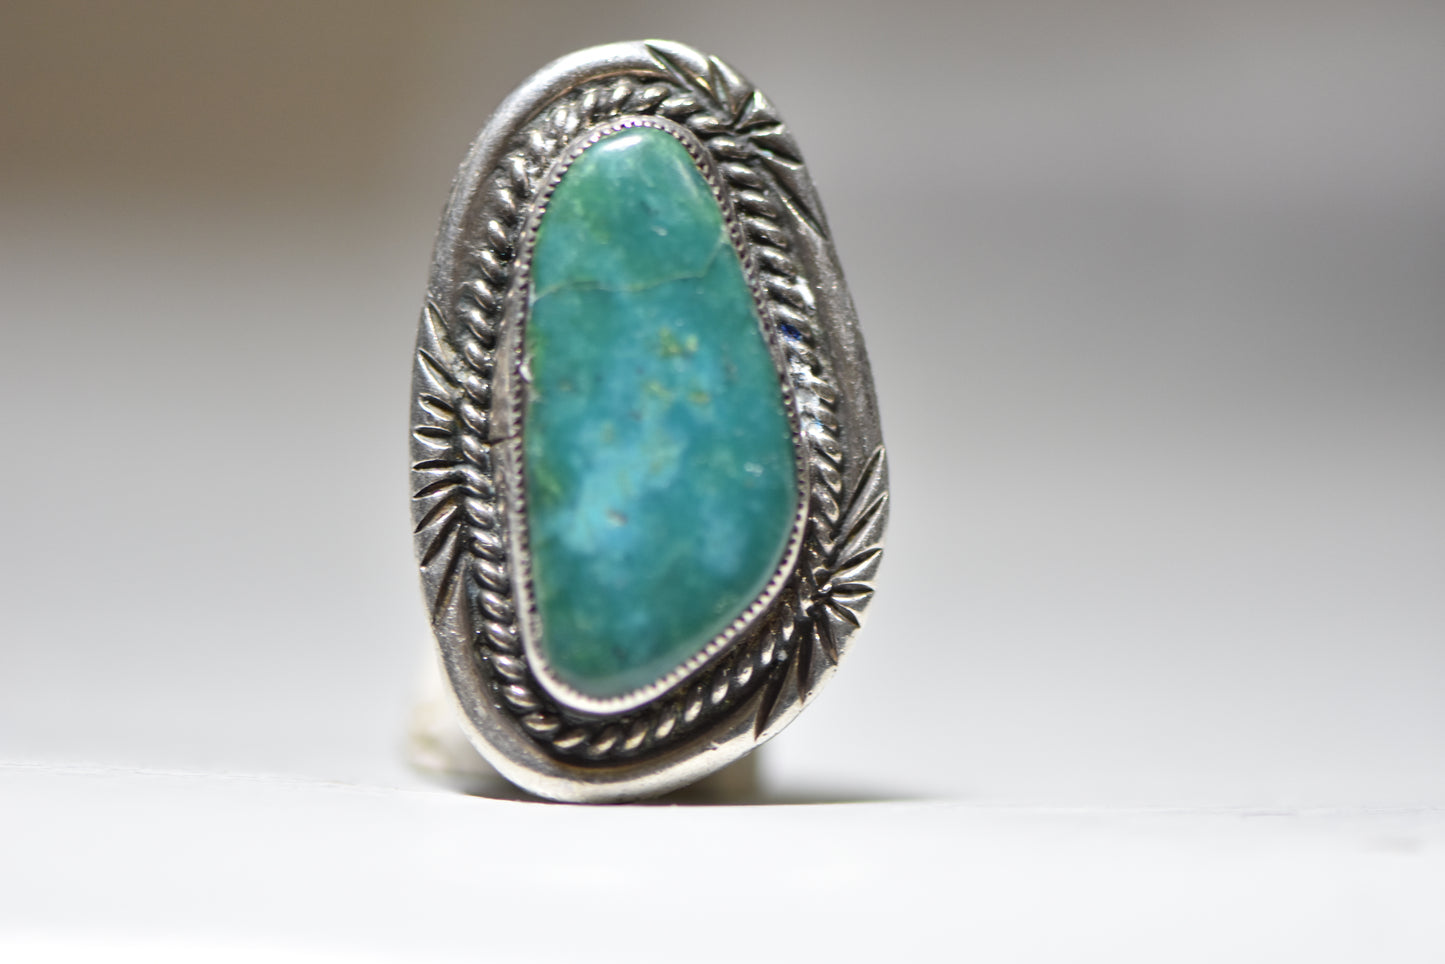 Turquoise ring southwest tribal sterling silver women